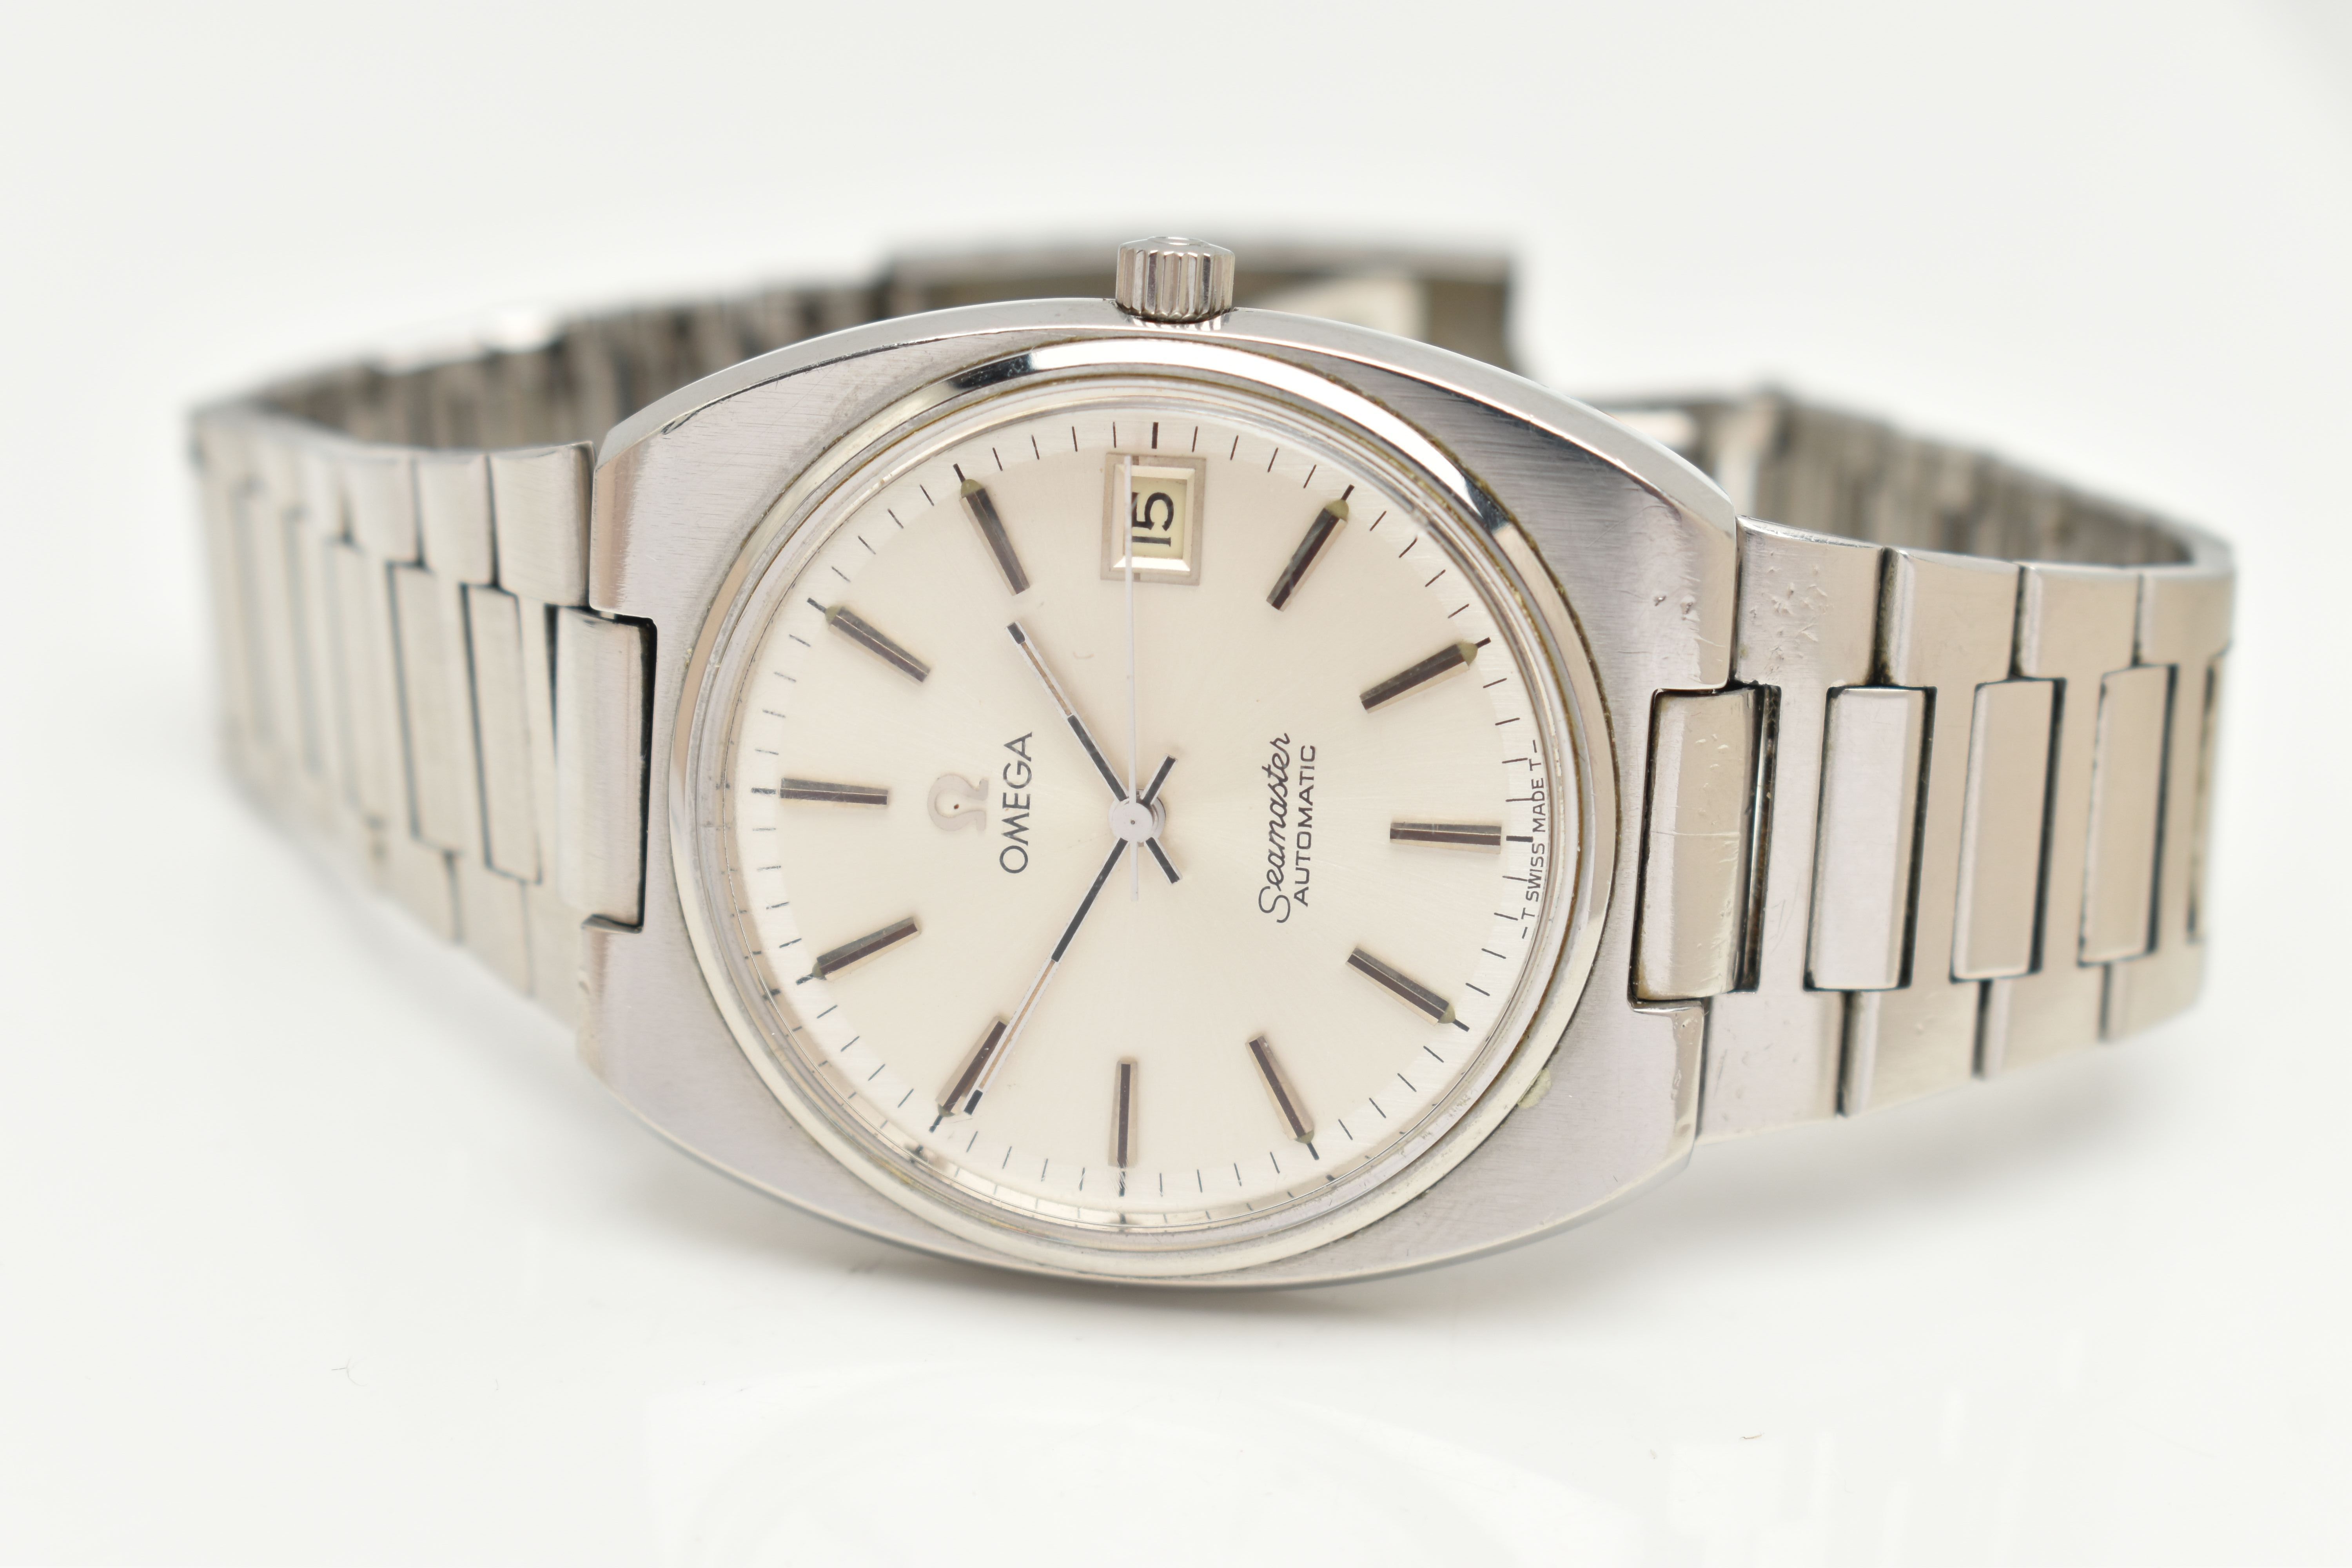 AN 'OMEGA' SEAMASTER WRISTWATCH, automatic movement, round silver tone dial signed 'Omega - Image 4 of 7